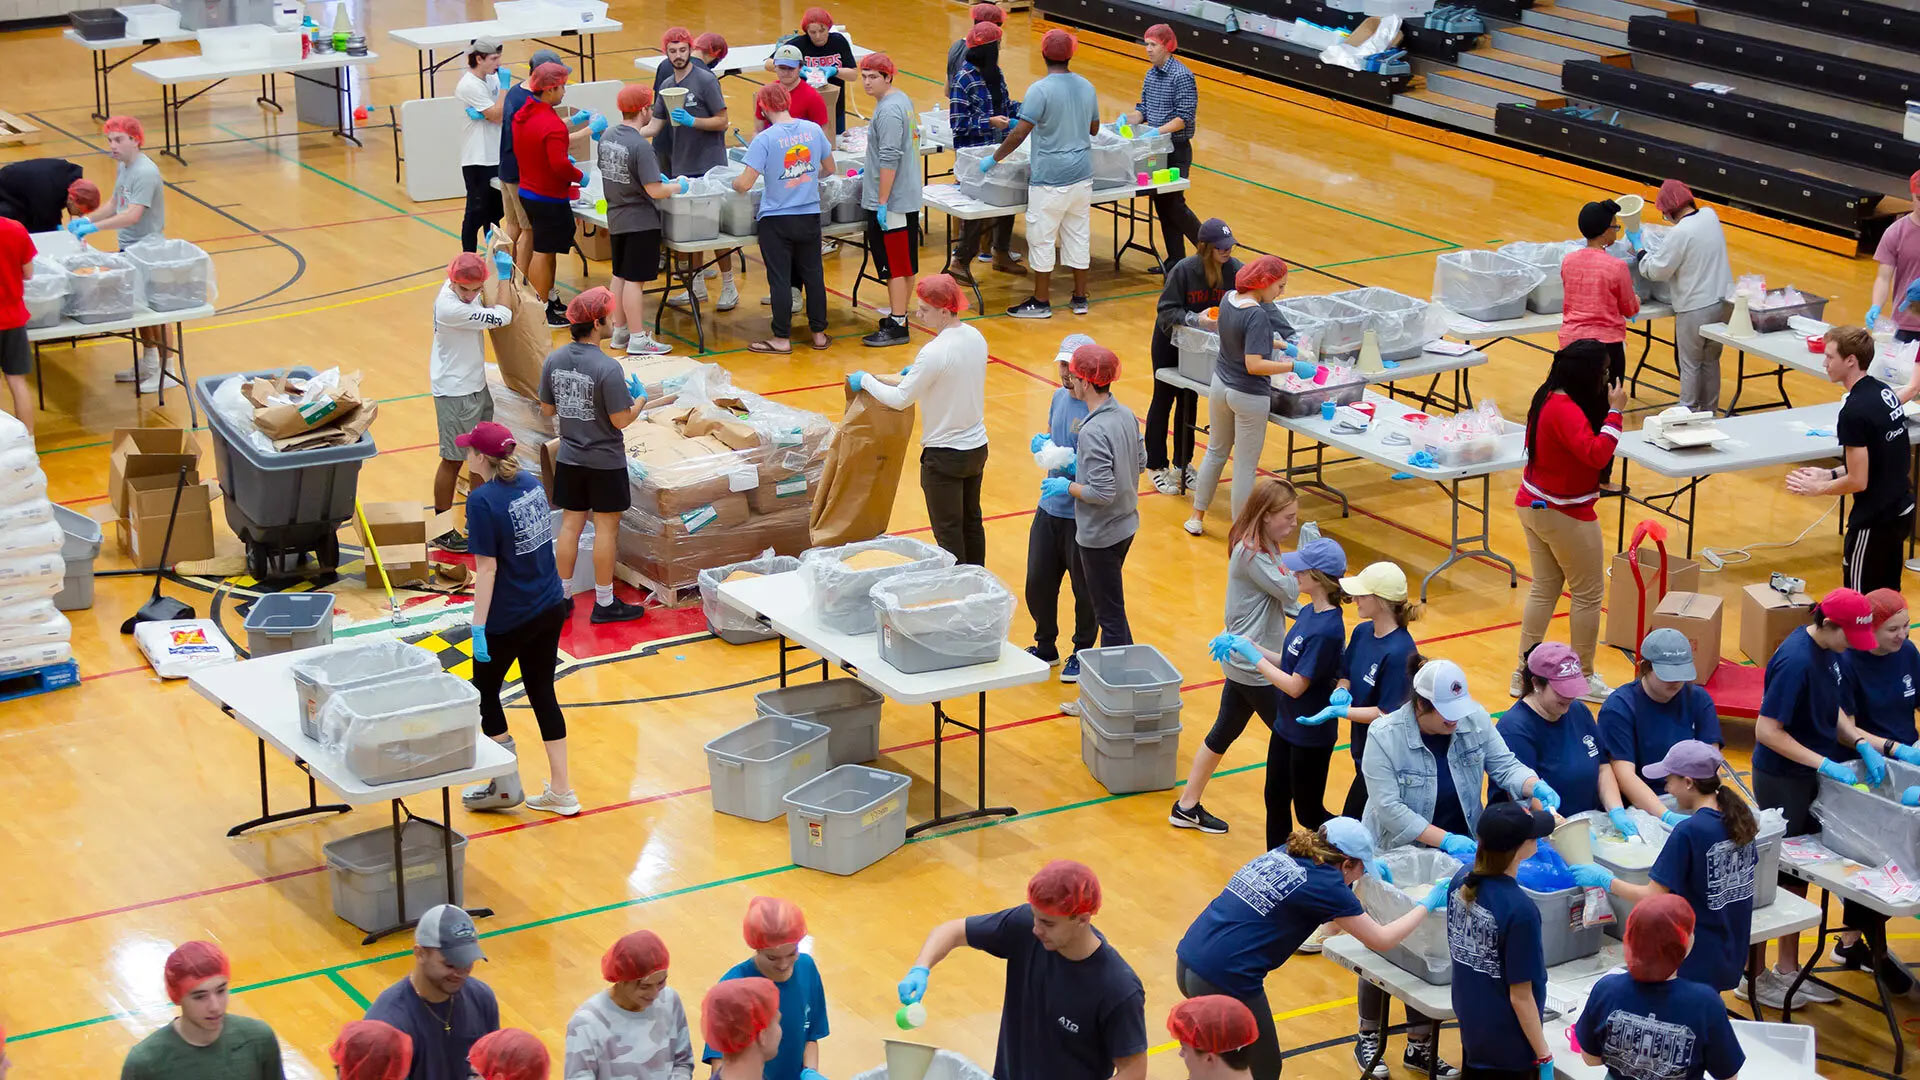 Students package thousands of nonperishable meals for Terps Against Hunger at Ritchie Coliseum in 2019. The organization has donated more than 3 million meals to the Capital Area Food Bank through dozens of volunteer-driven events on campus over the last 10 years. Photo by Emma Howells.